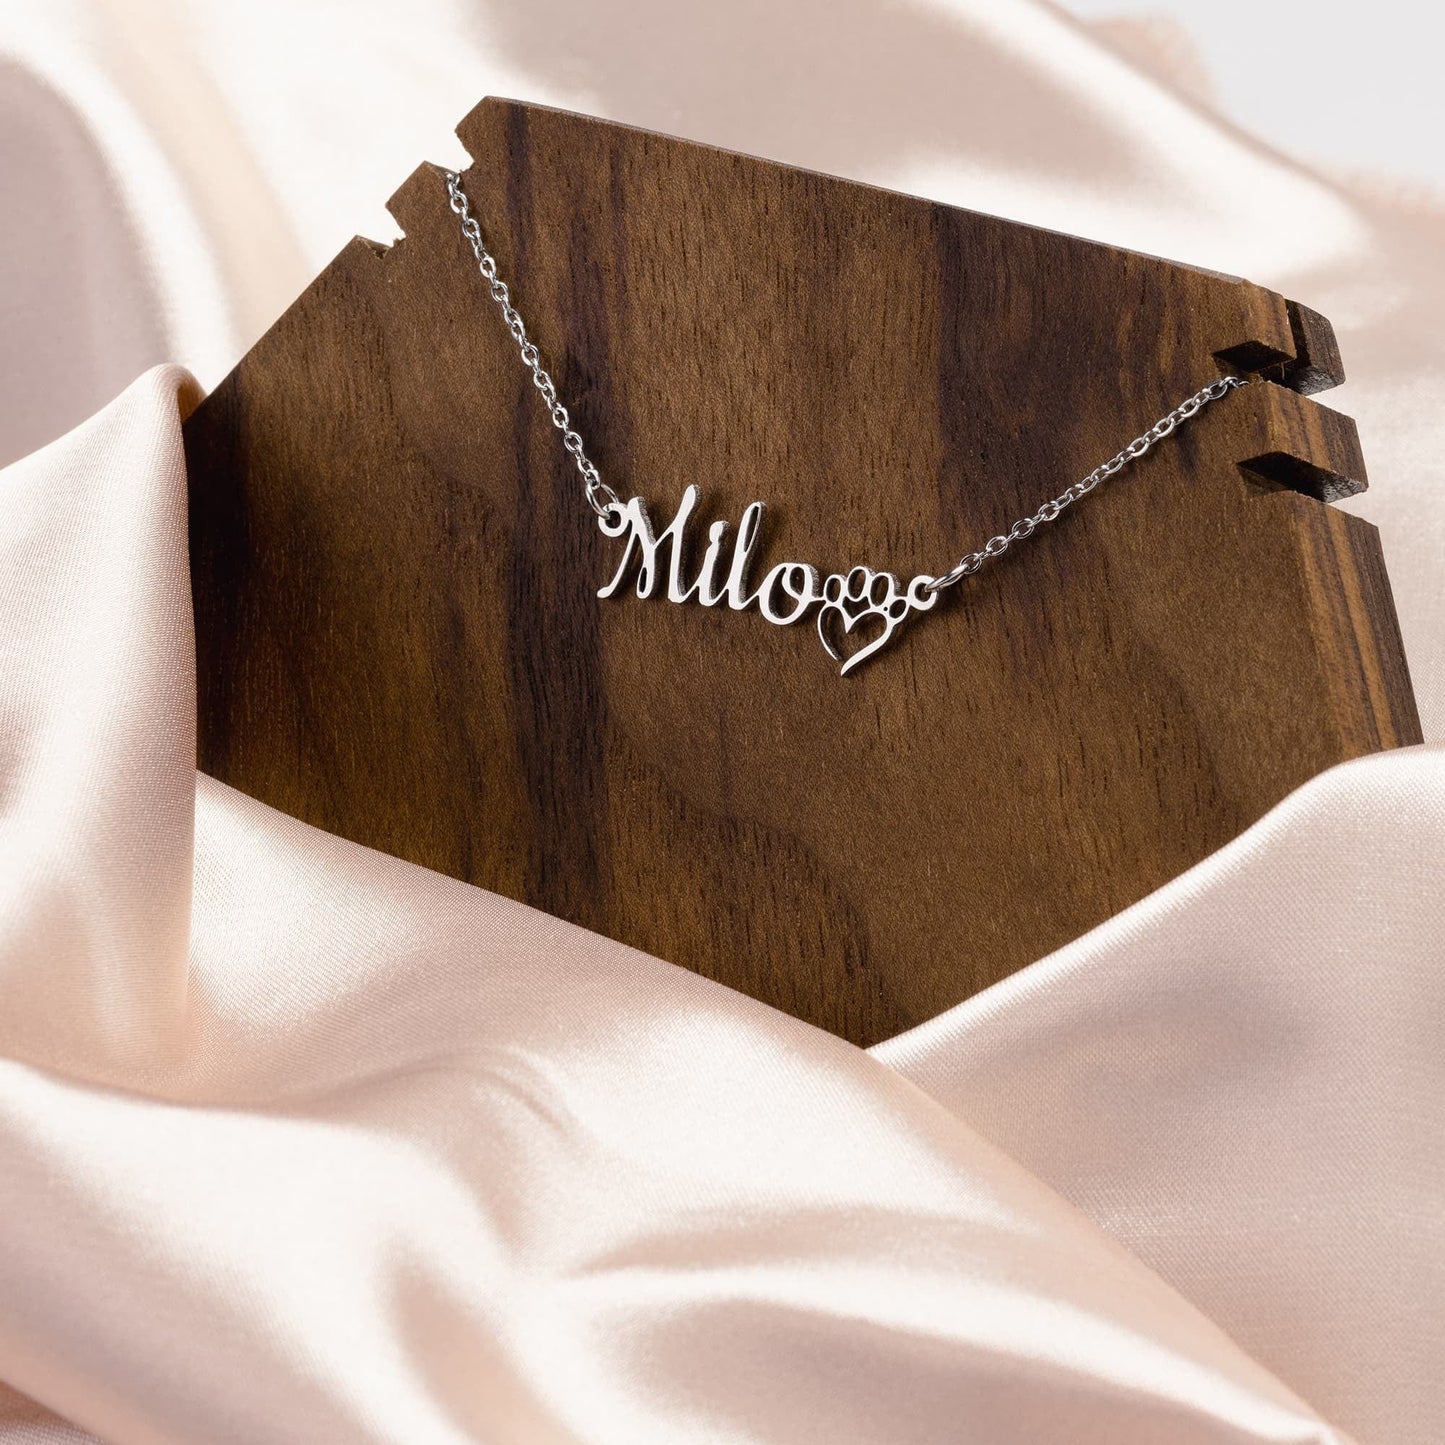 Personalized Dog Mom Name Necklace, Dog Mom Jewelry, Silver Custom Name Necklace